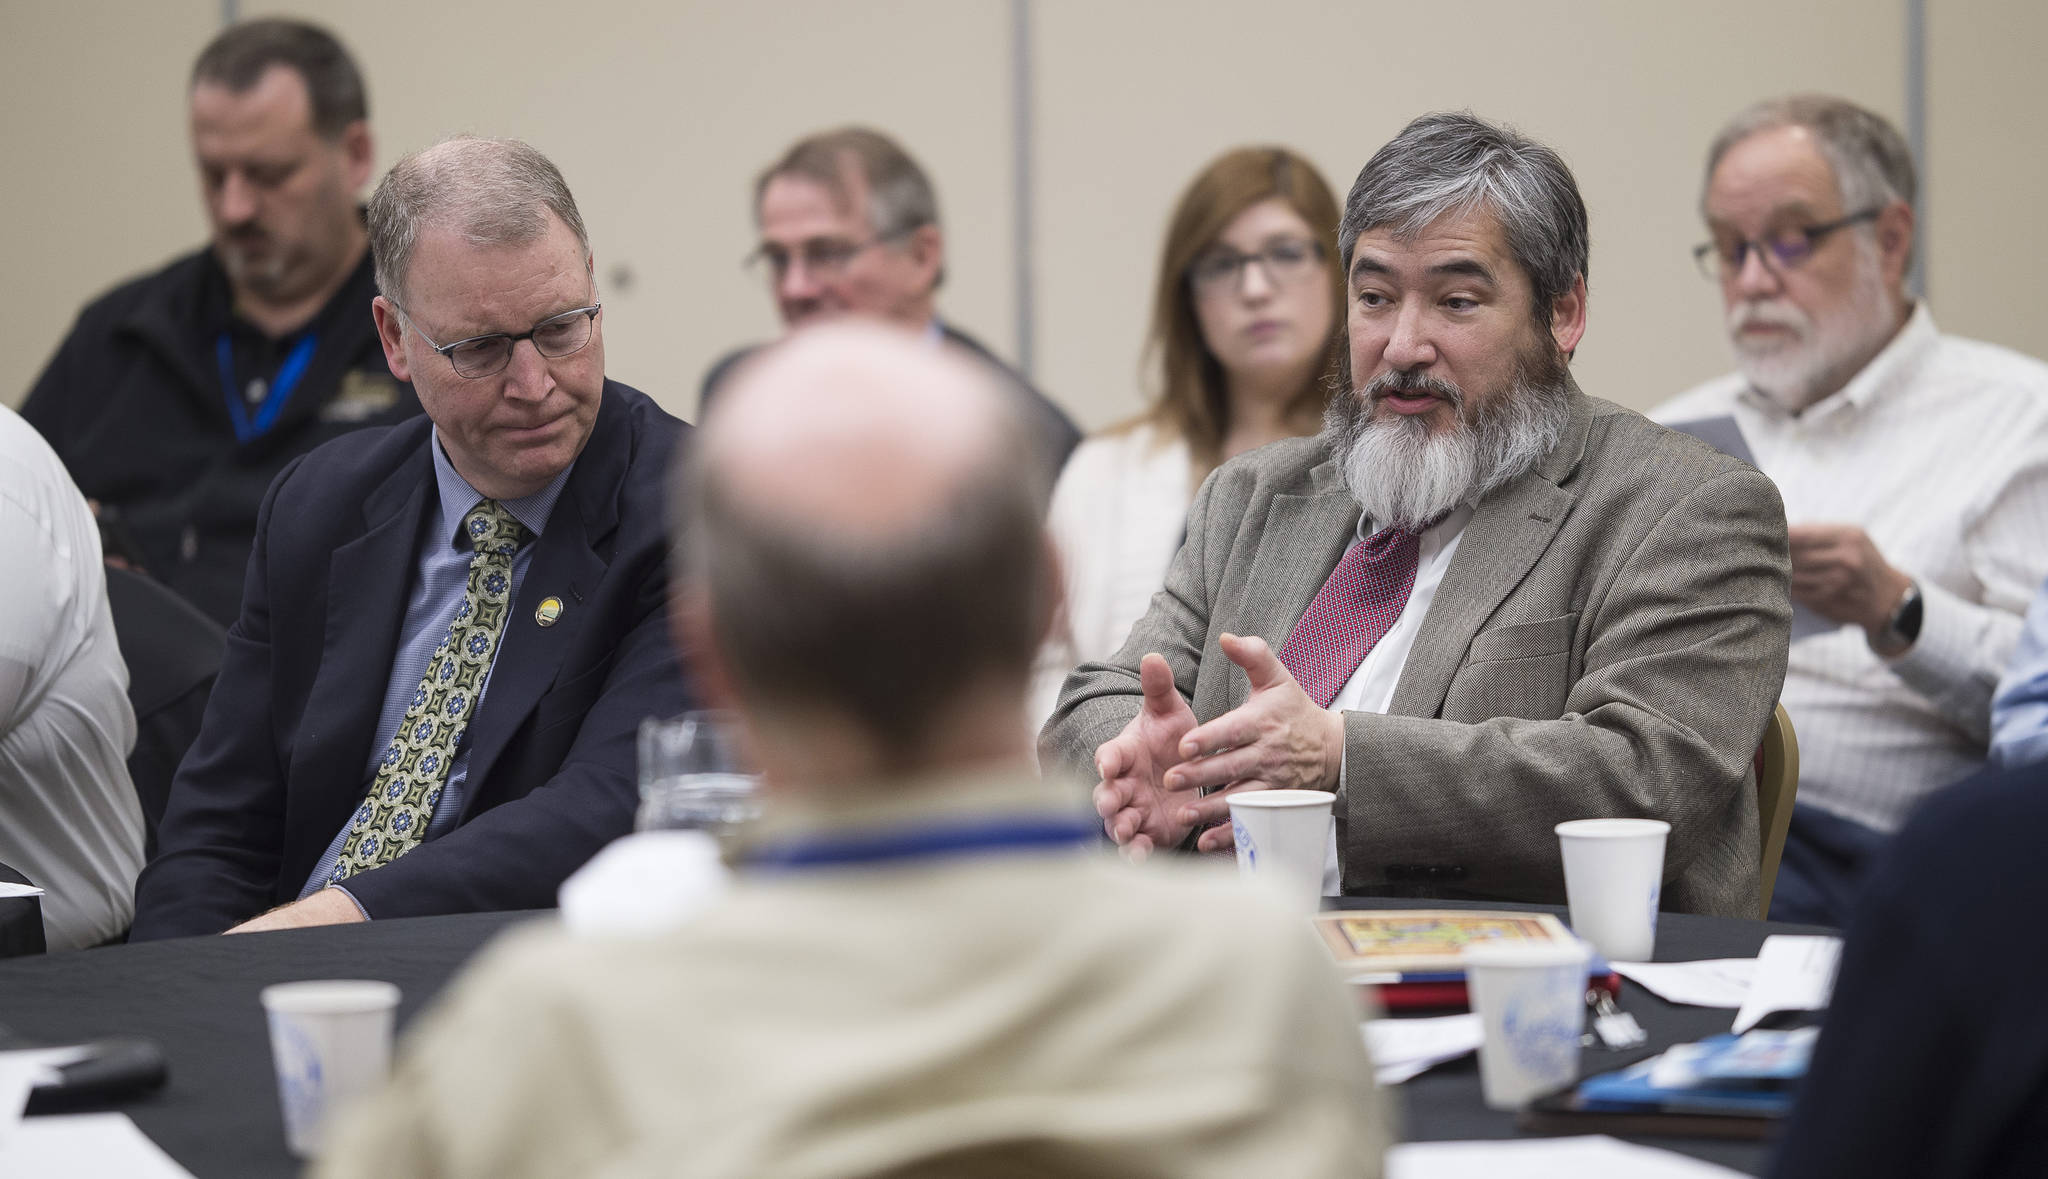 Rep. Sam Kito III, D-Juneau, right, speaks alongside Marc Luiken, Commissioner of the Department of Transportation and Public Facilities during a breakout session on Alaska Marine Highway System Reform at Southeast Conference at the Elizabeth Peratrovich Hall on Wednesday, Feb. 14, 2018. Kito said this week that he will not seek re-election. (Michael Penn | Juneau Empire File)